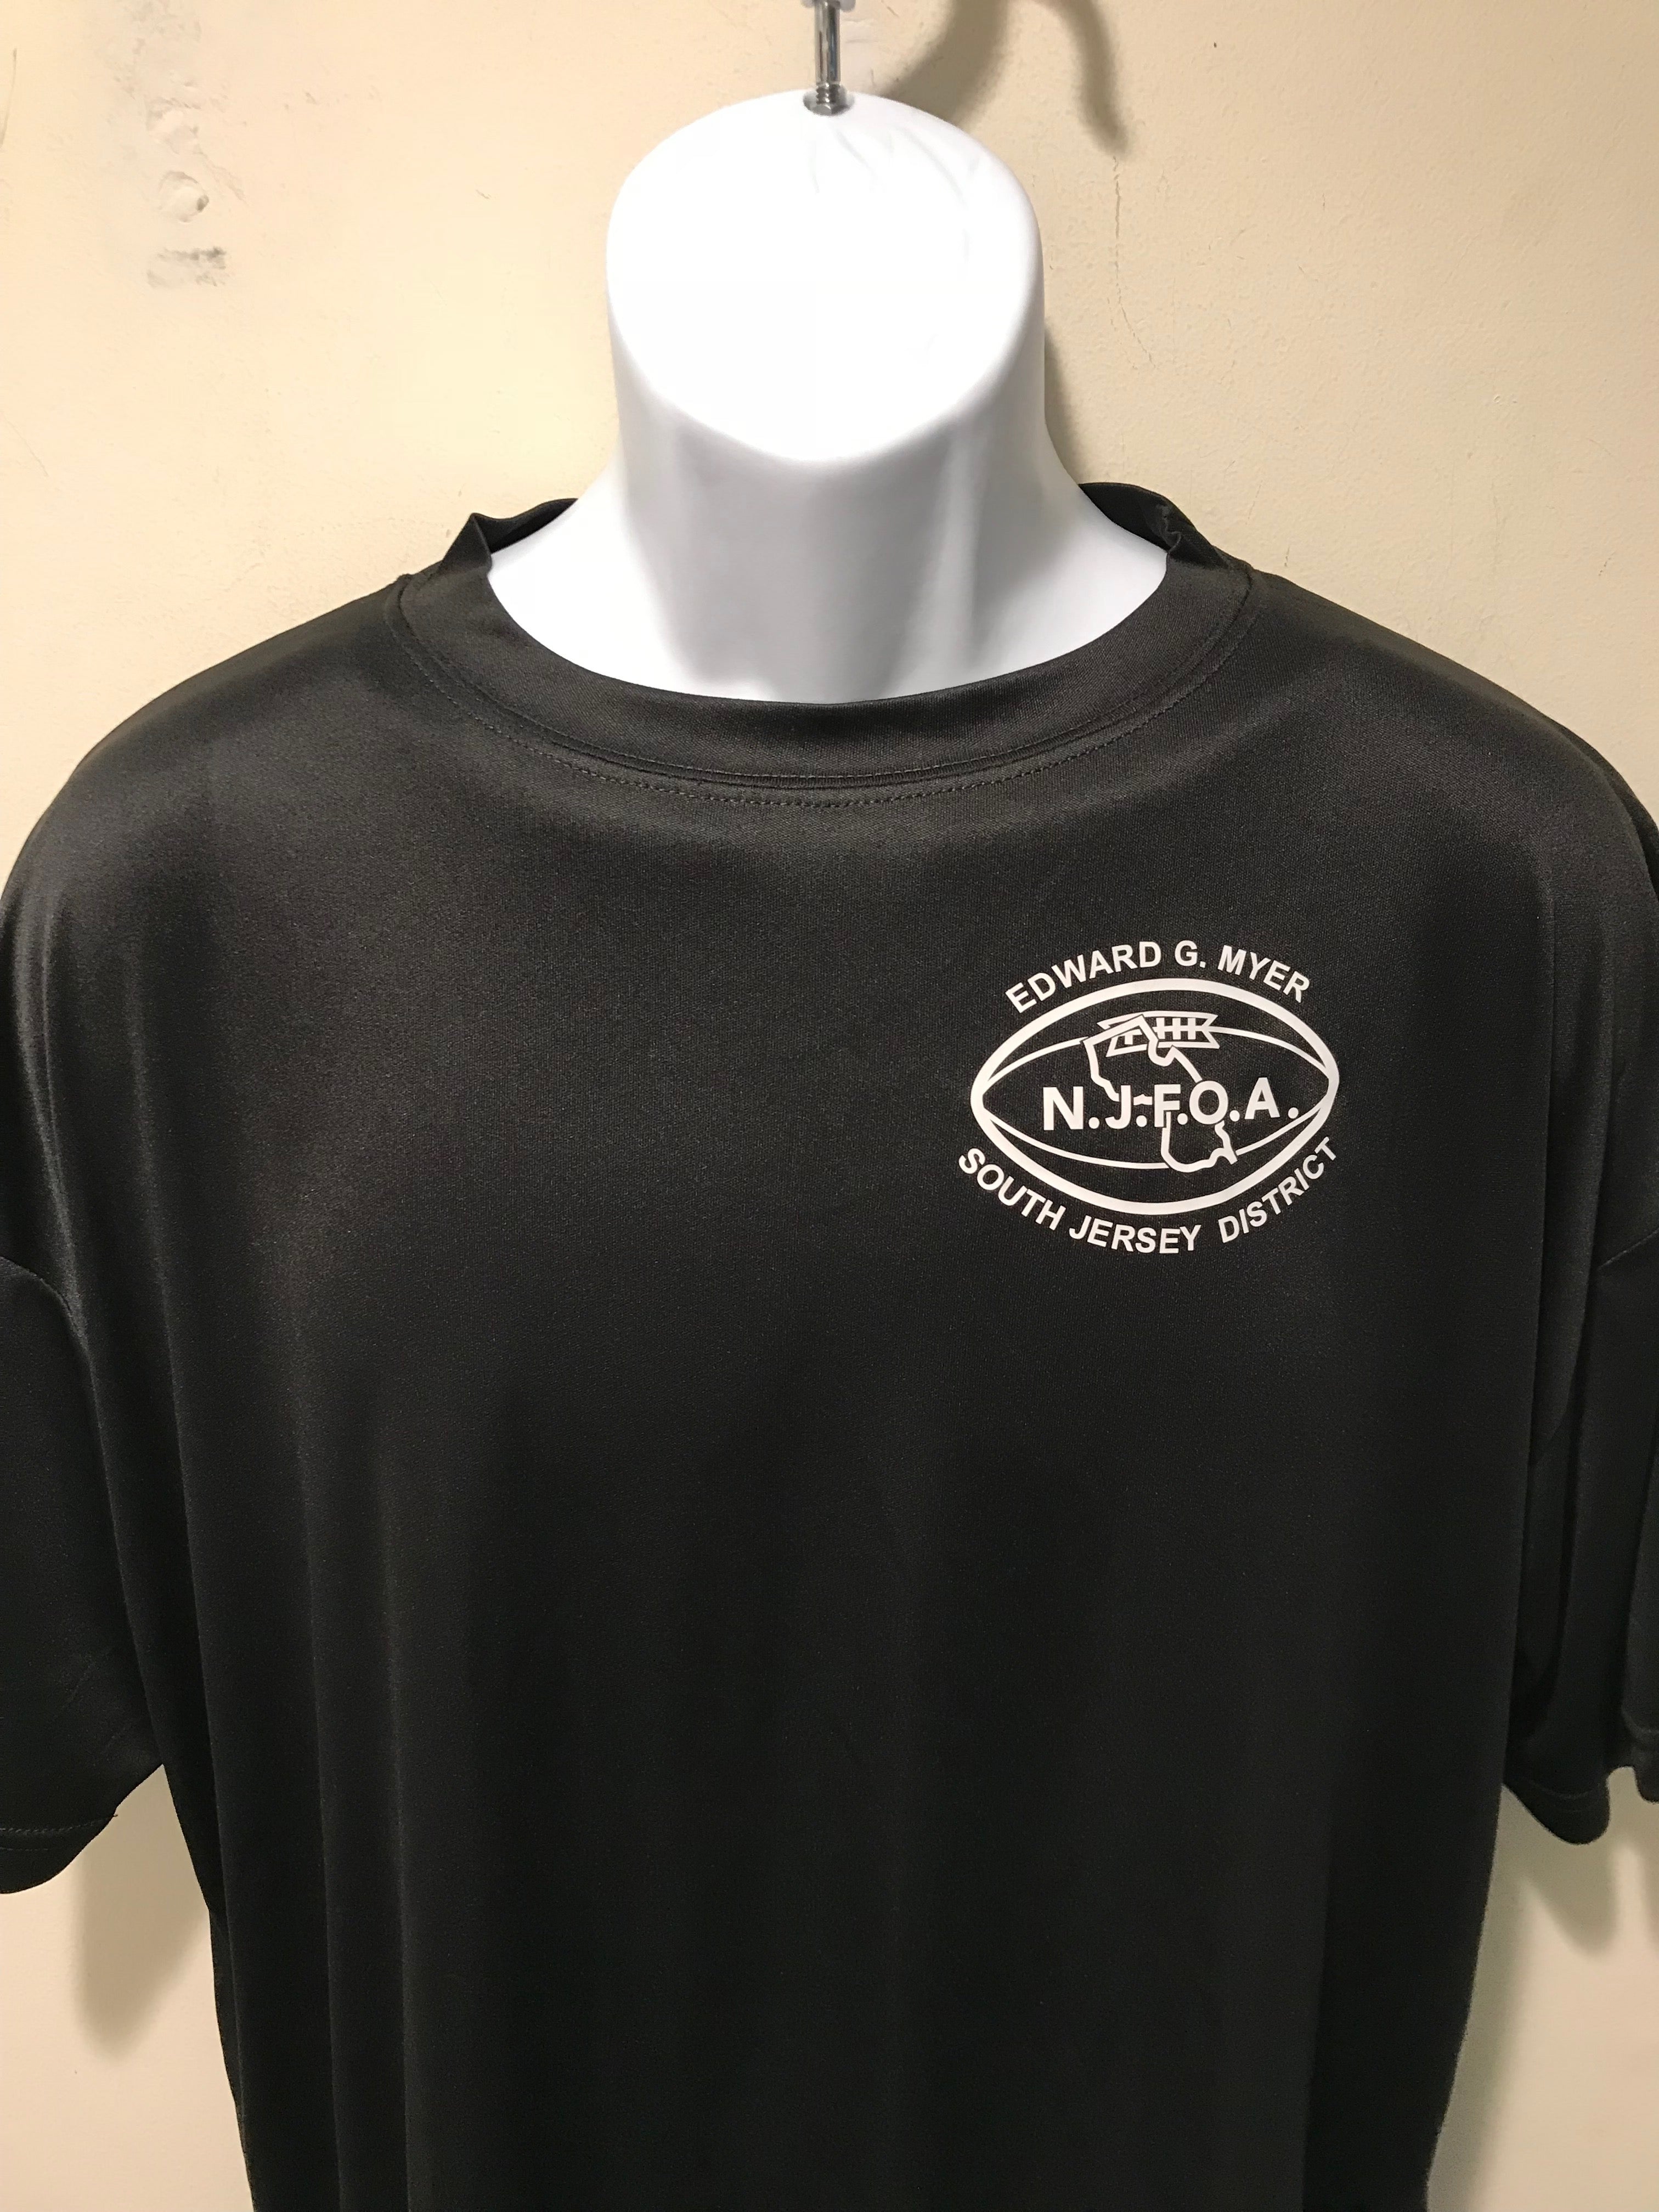 Ed Myer Performance T-Shirt | All Sports Officials